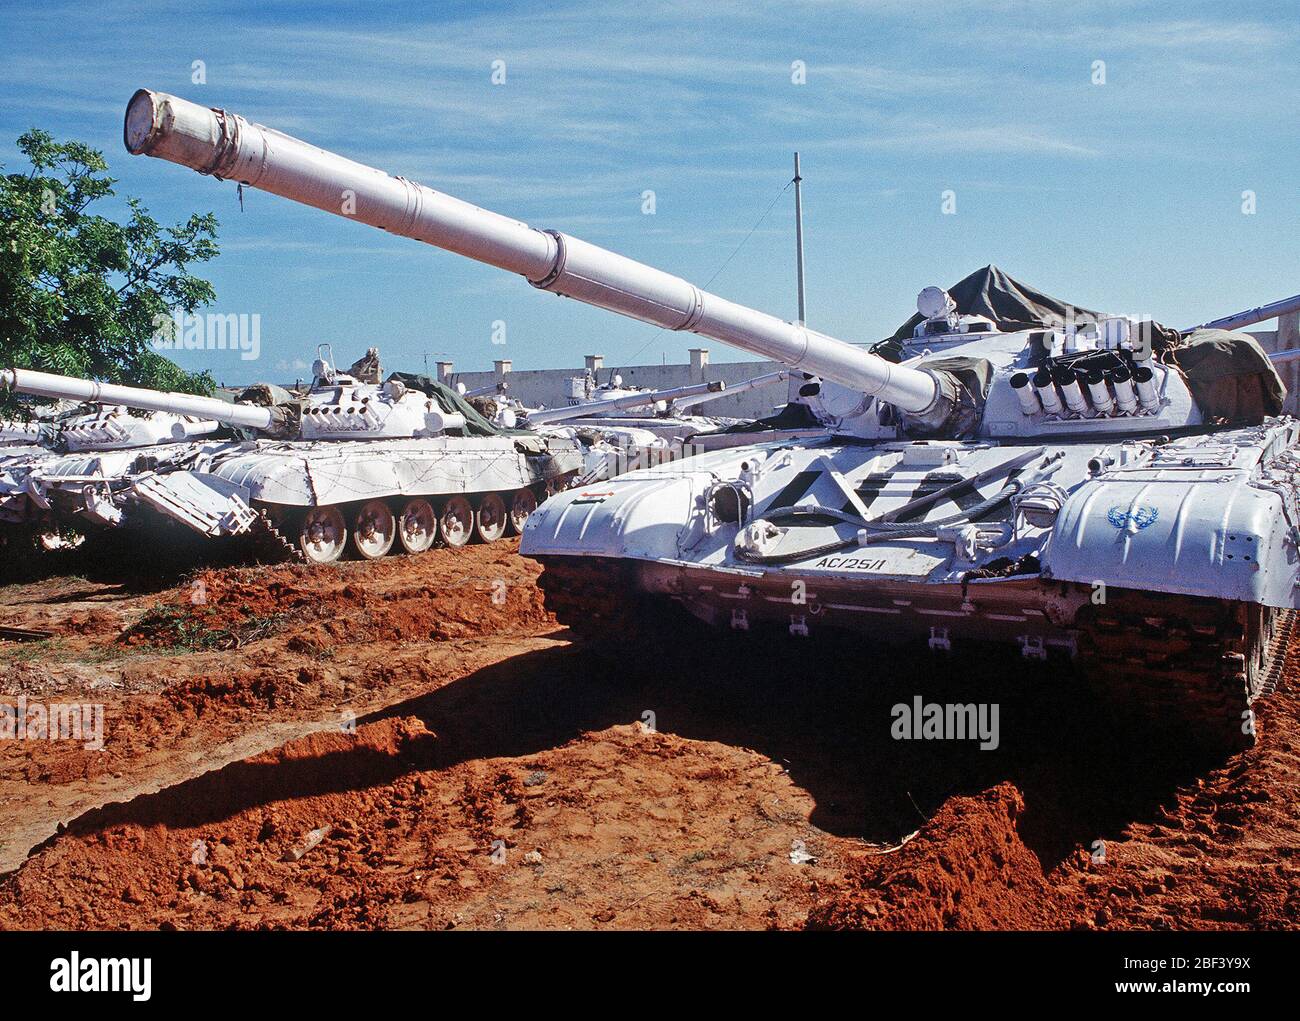 1993 - United Nations tanks at the Belgian compound in Kismayo, Somalia.  The UN forces are in Somalia in support of Operation CONTINUE HOPE.  Front view of a T-72 main battle tank with UN  markings. Stock Photo